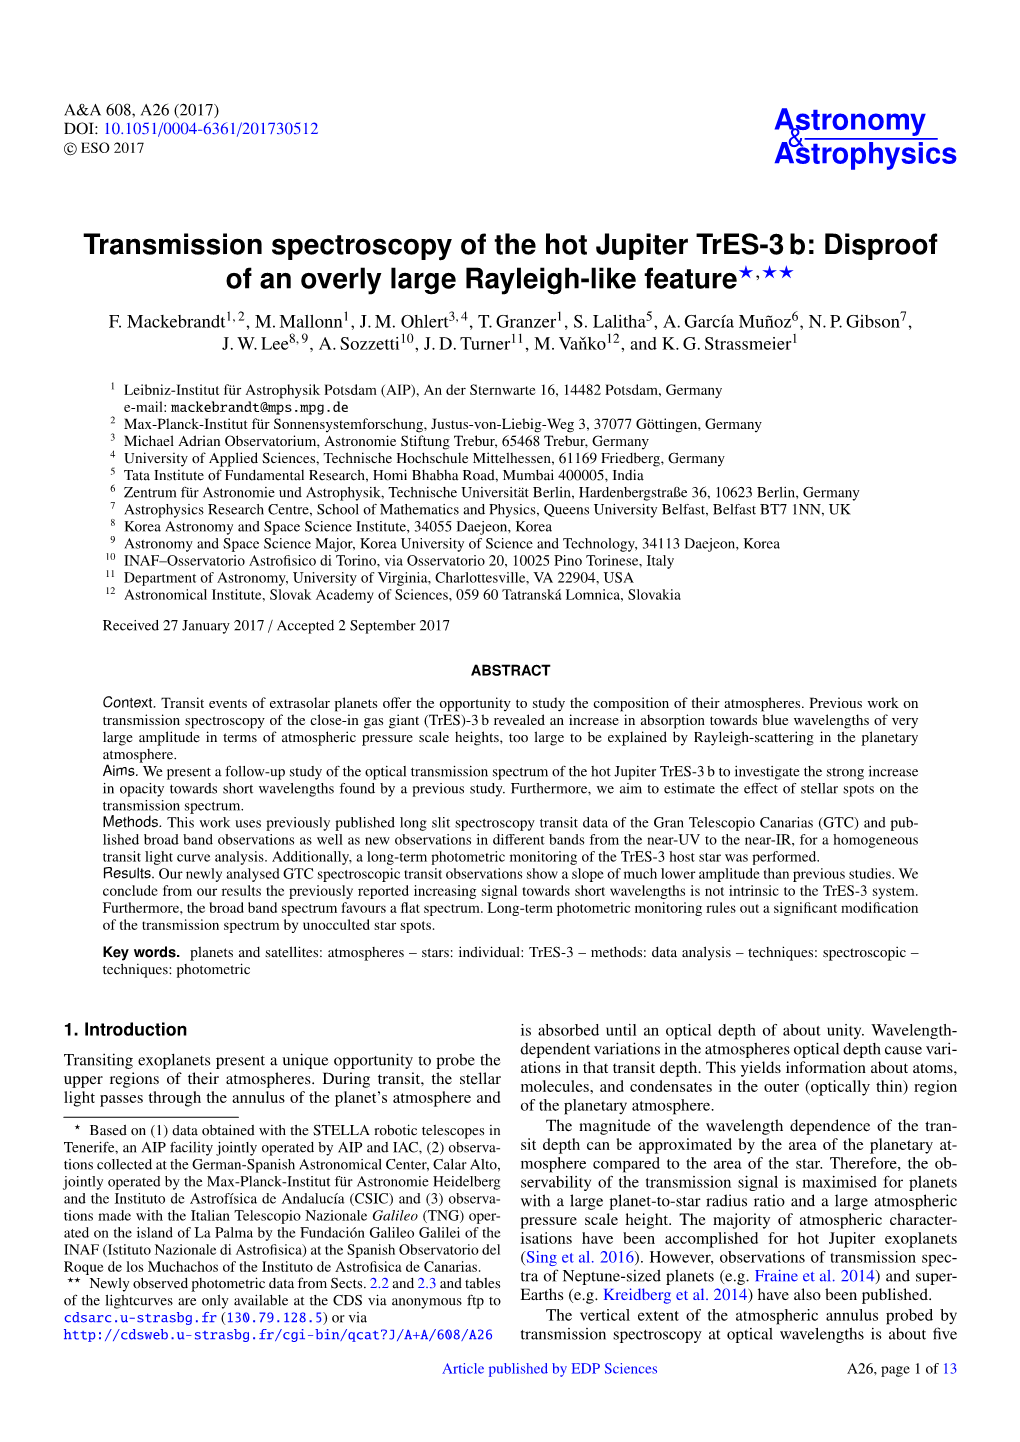 Transmission Spectroscopy of the Hot Jupiter Tres-3 B: Disproof of an Overly Large Rayleigh-Like Feature?,?? F